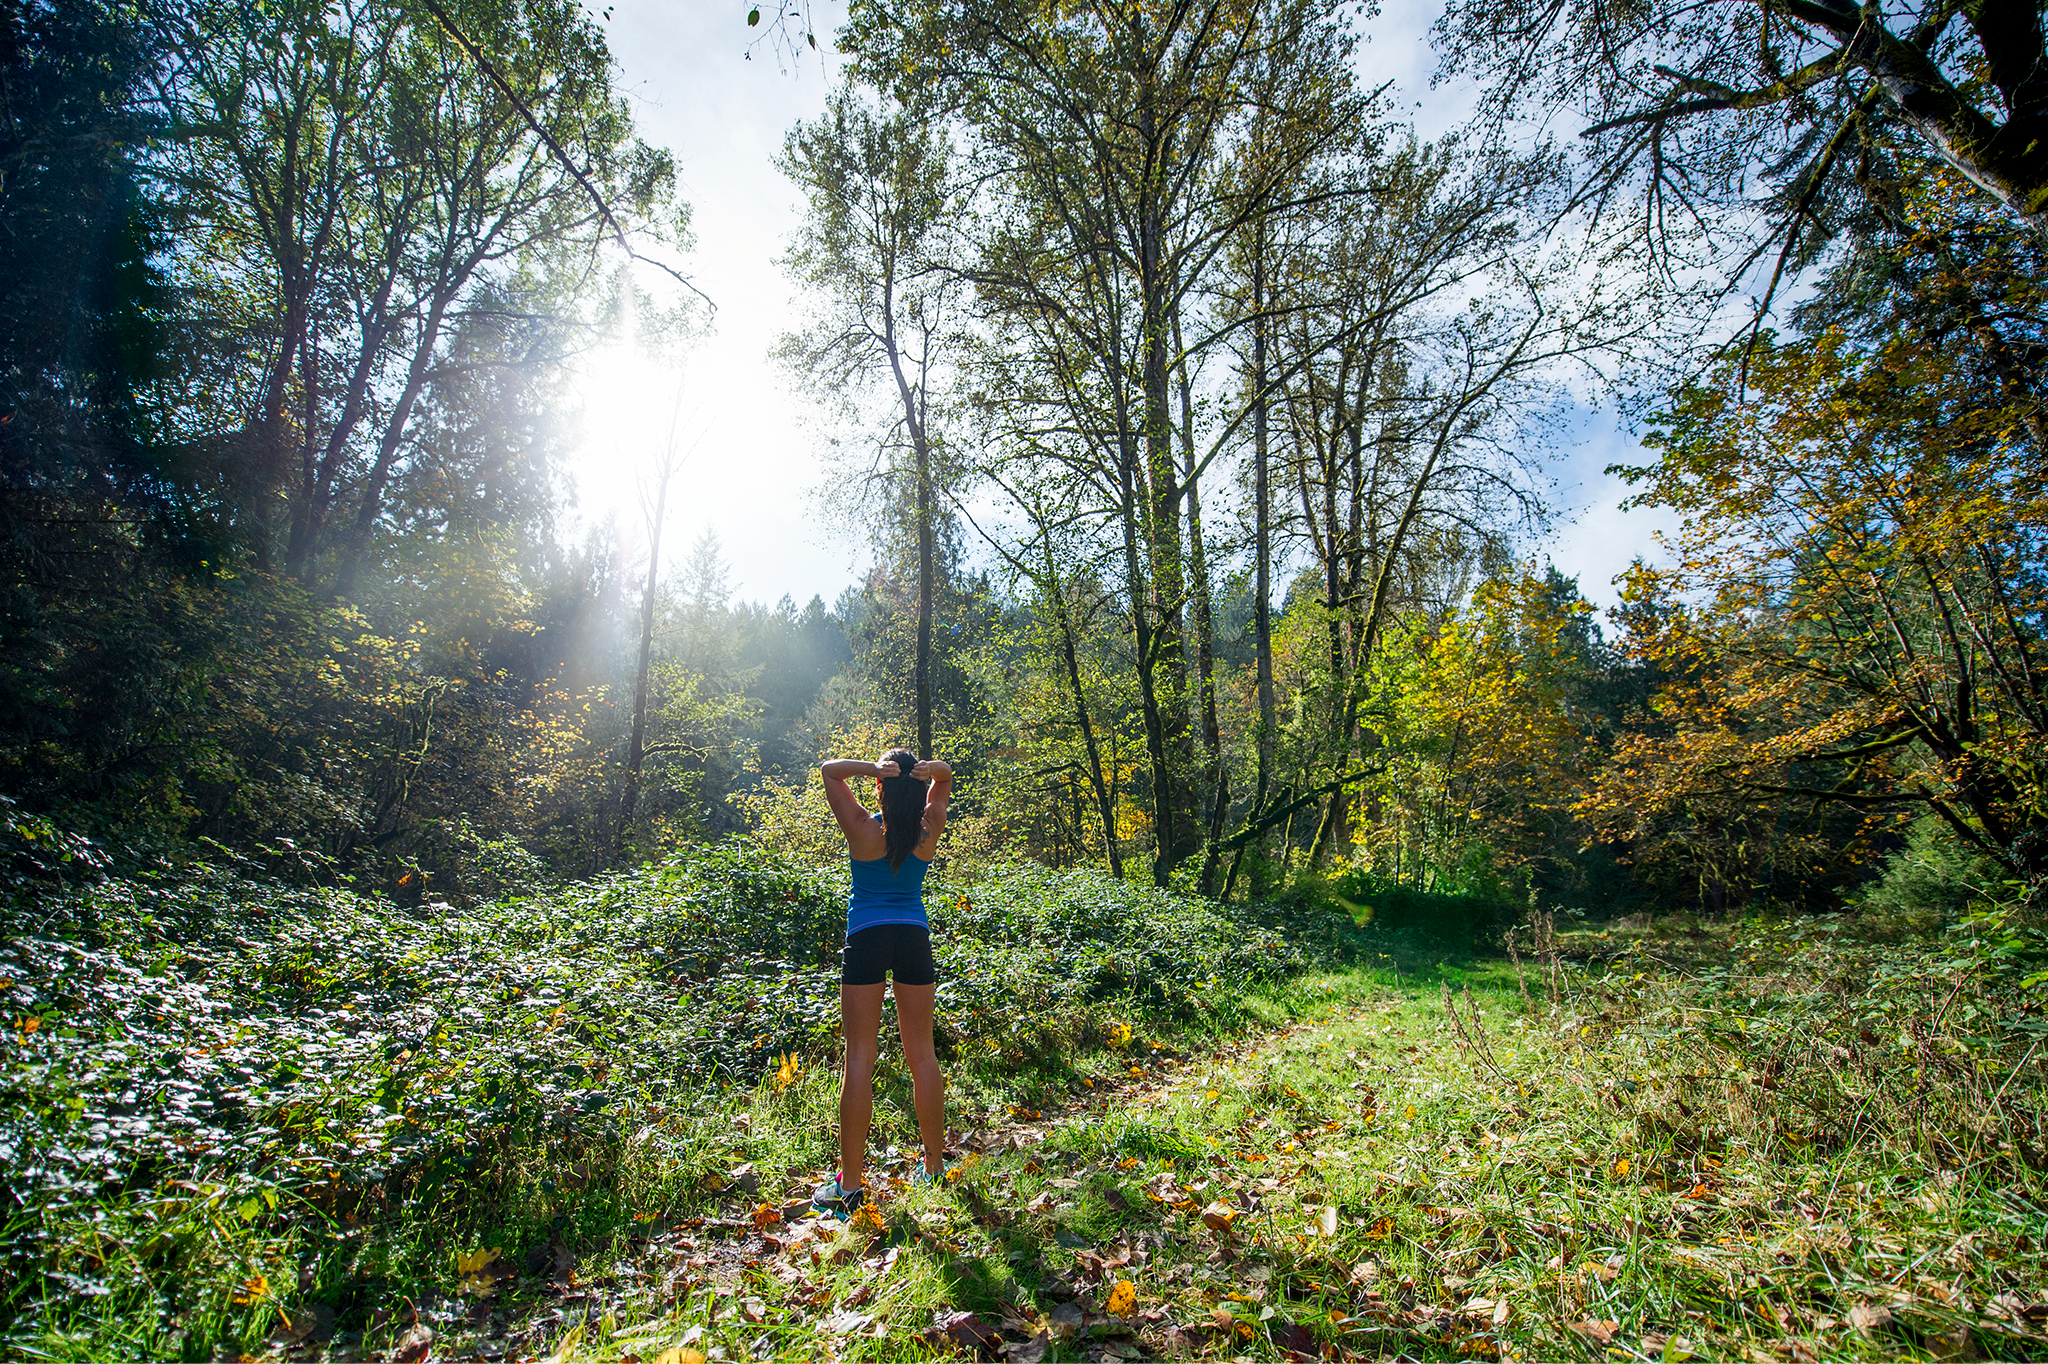 A woman hiking in the forest with sunlight beaming through the trees.